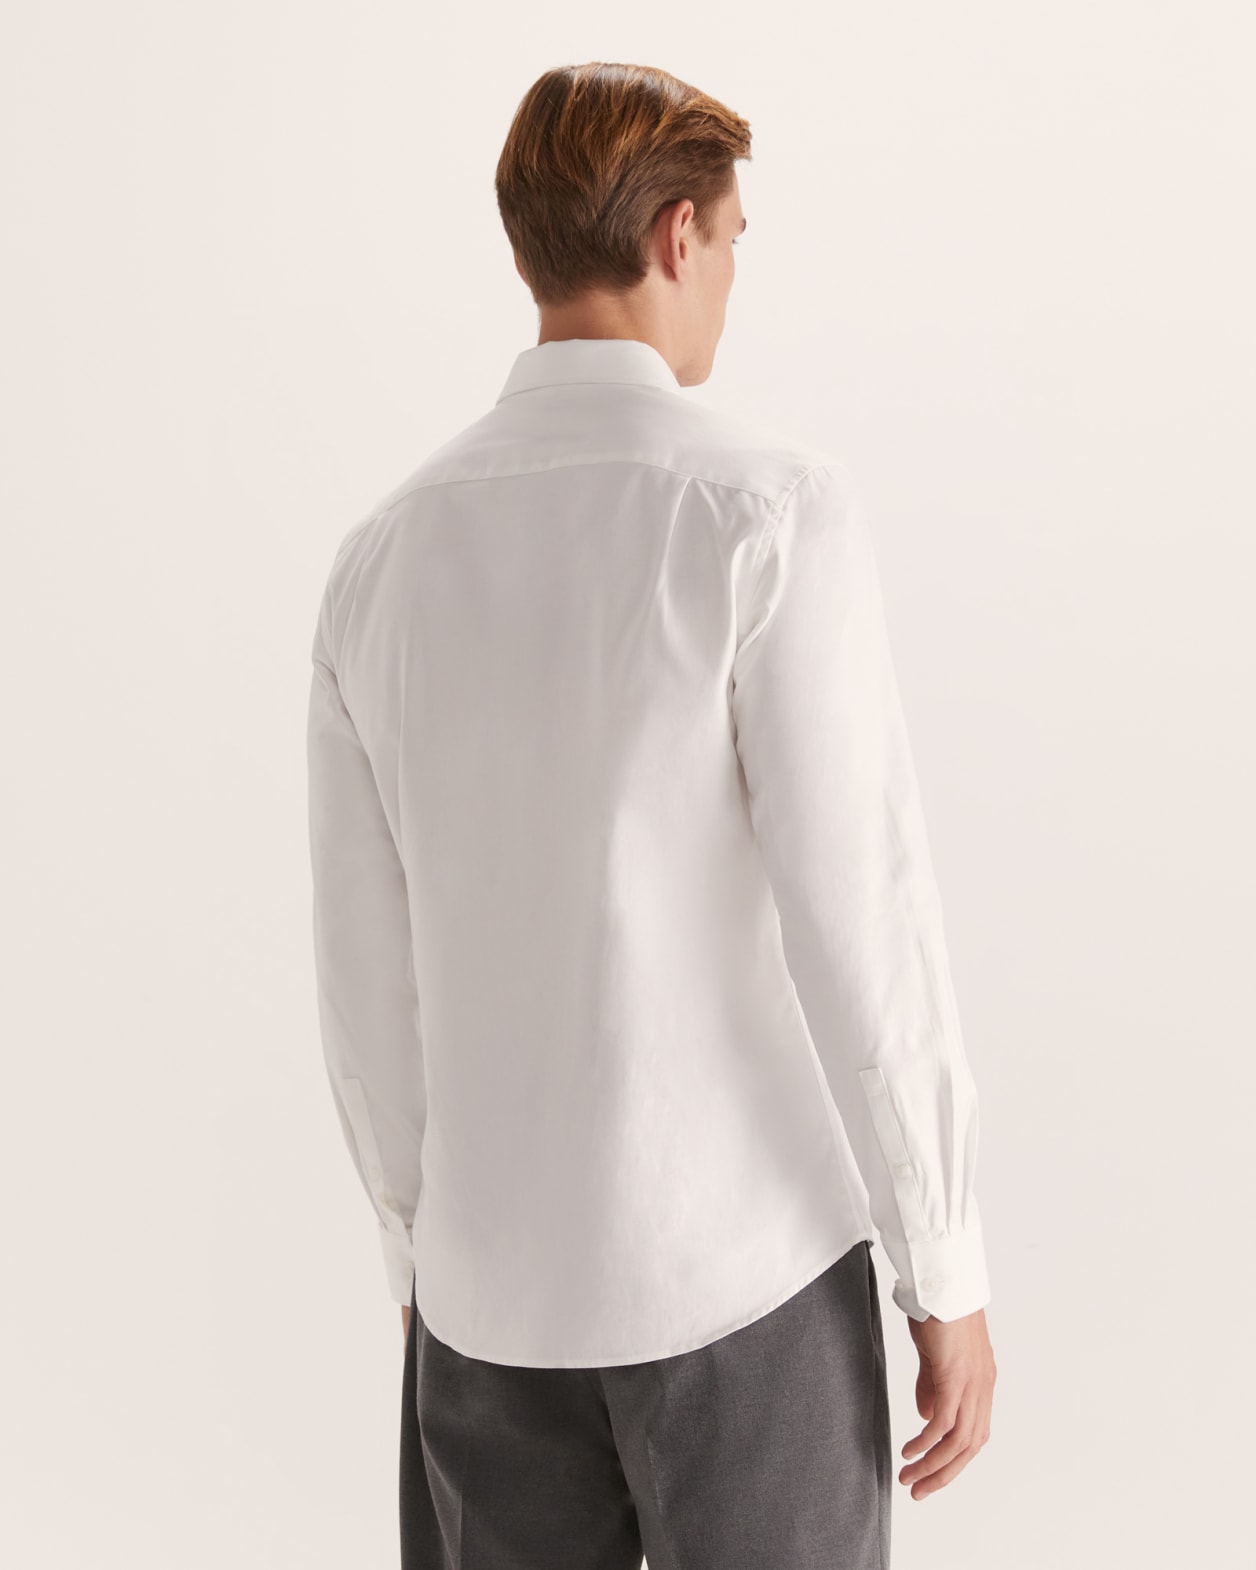 Munroe Easy Care Twill Shirt in WHITE